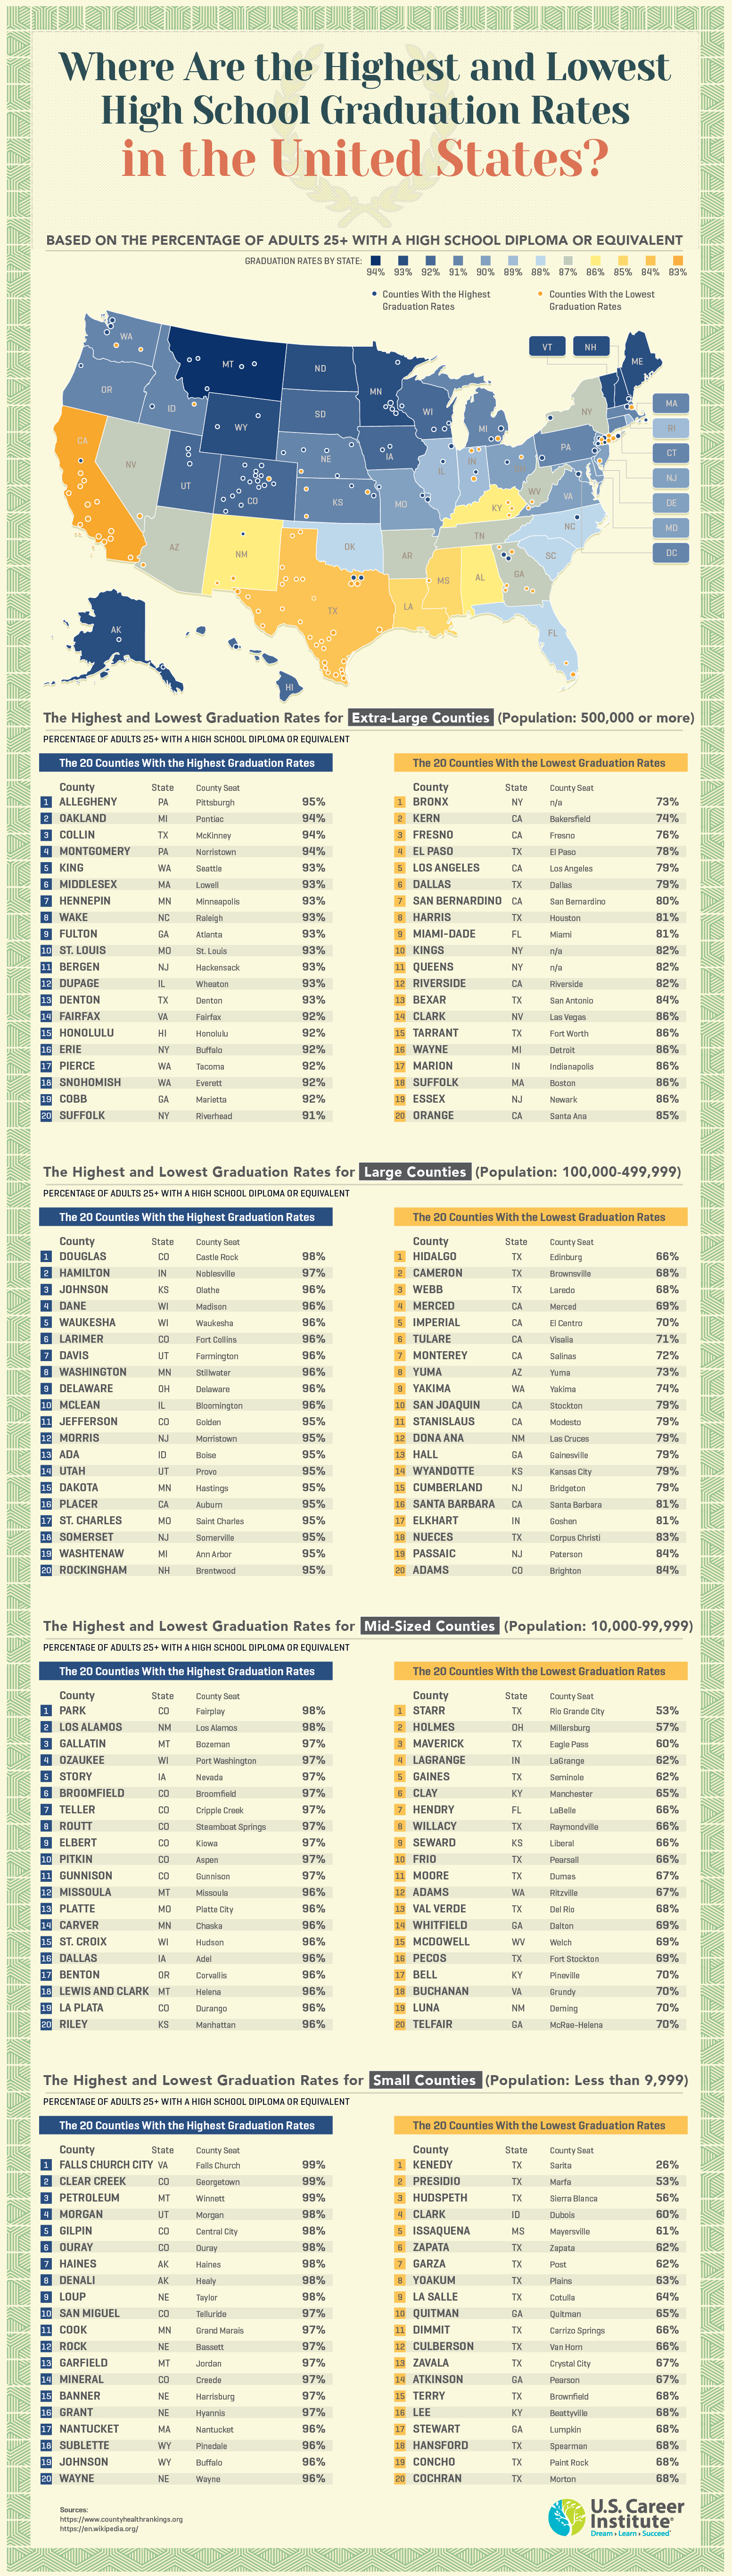 Where Are the Highest & Lowest Graduation Rates in the U.S - Online Career Training School USCareerInstitute.edu - Infographic